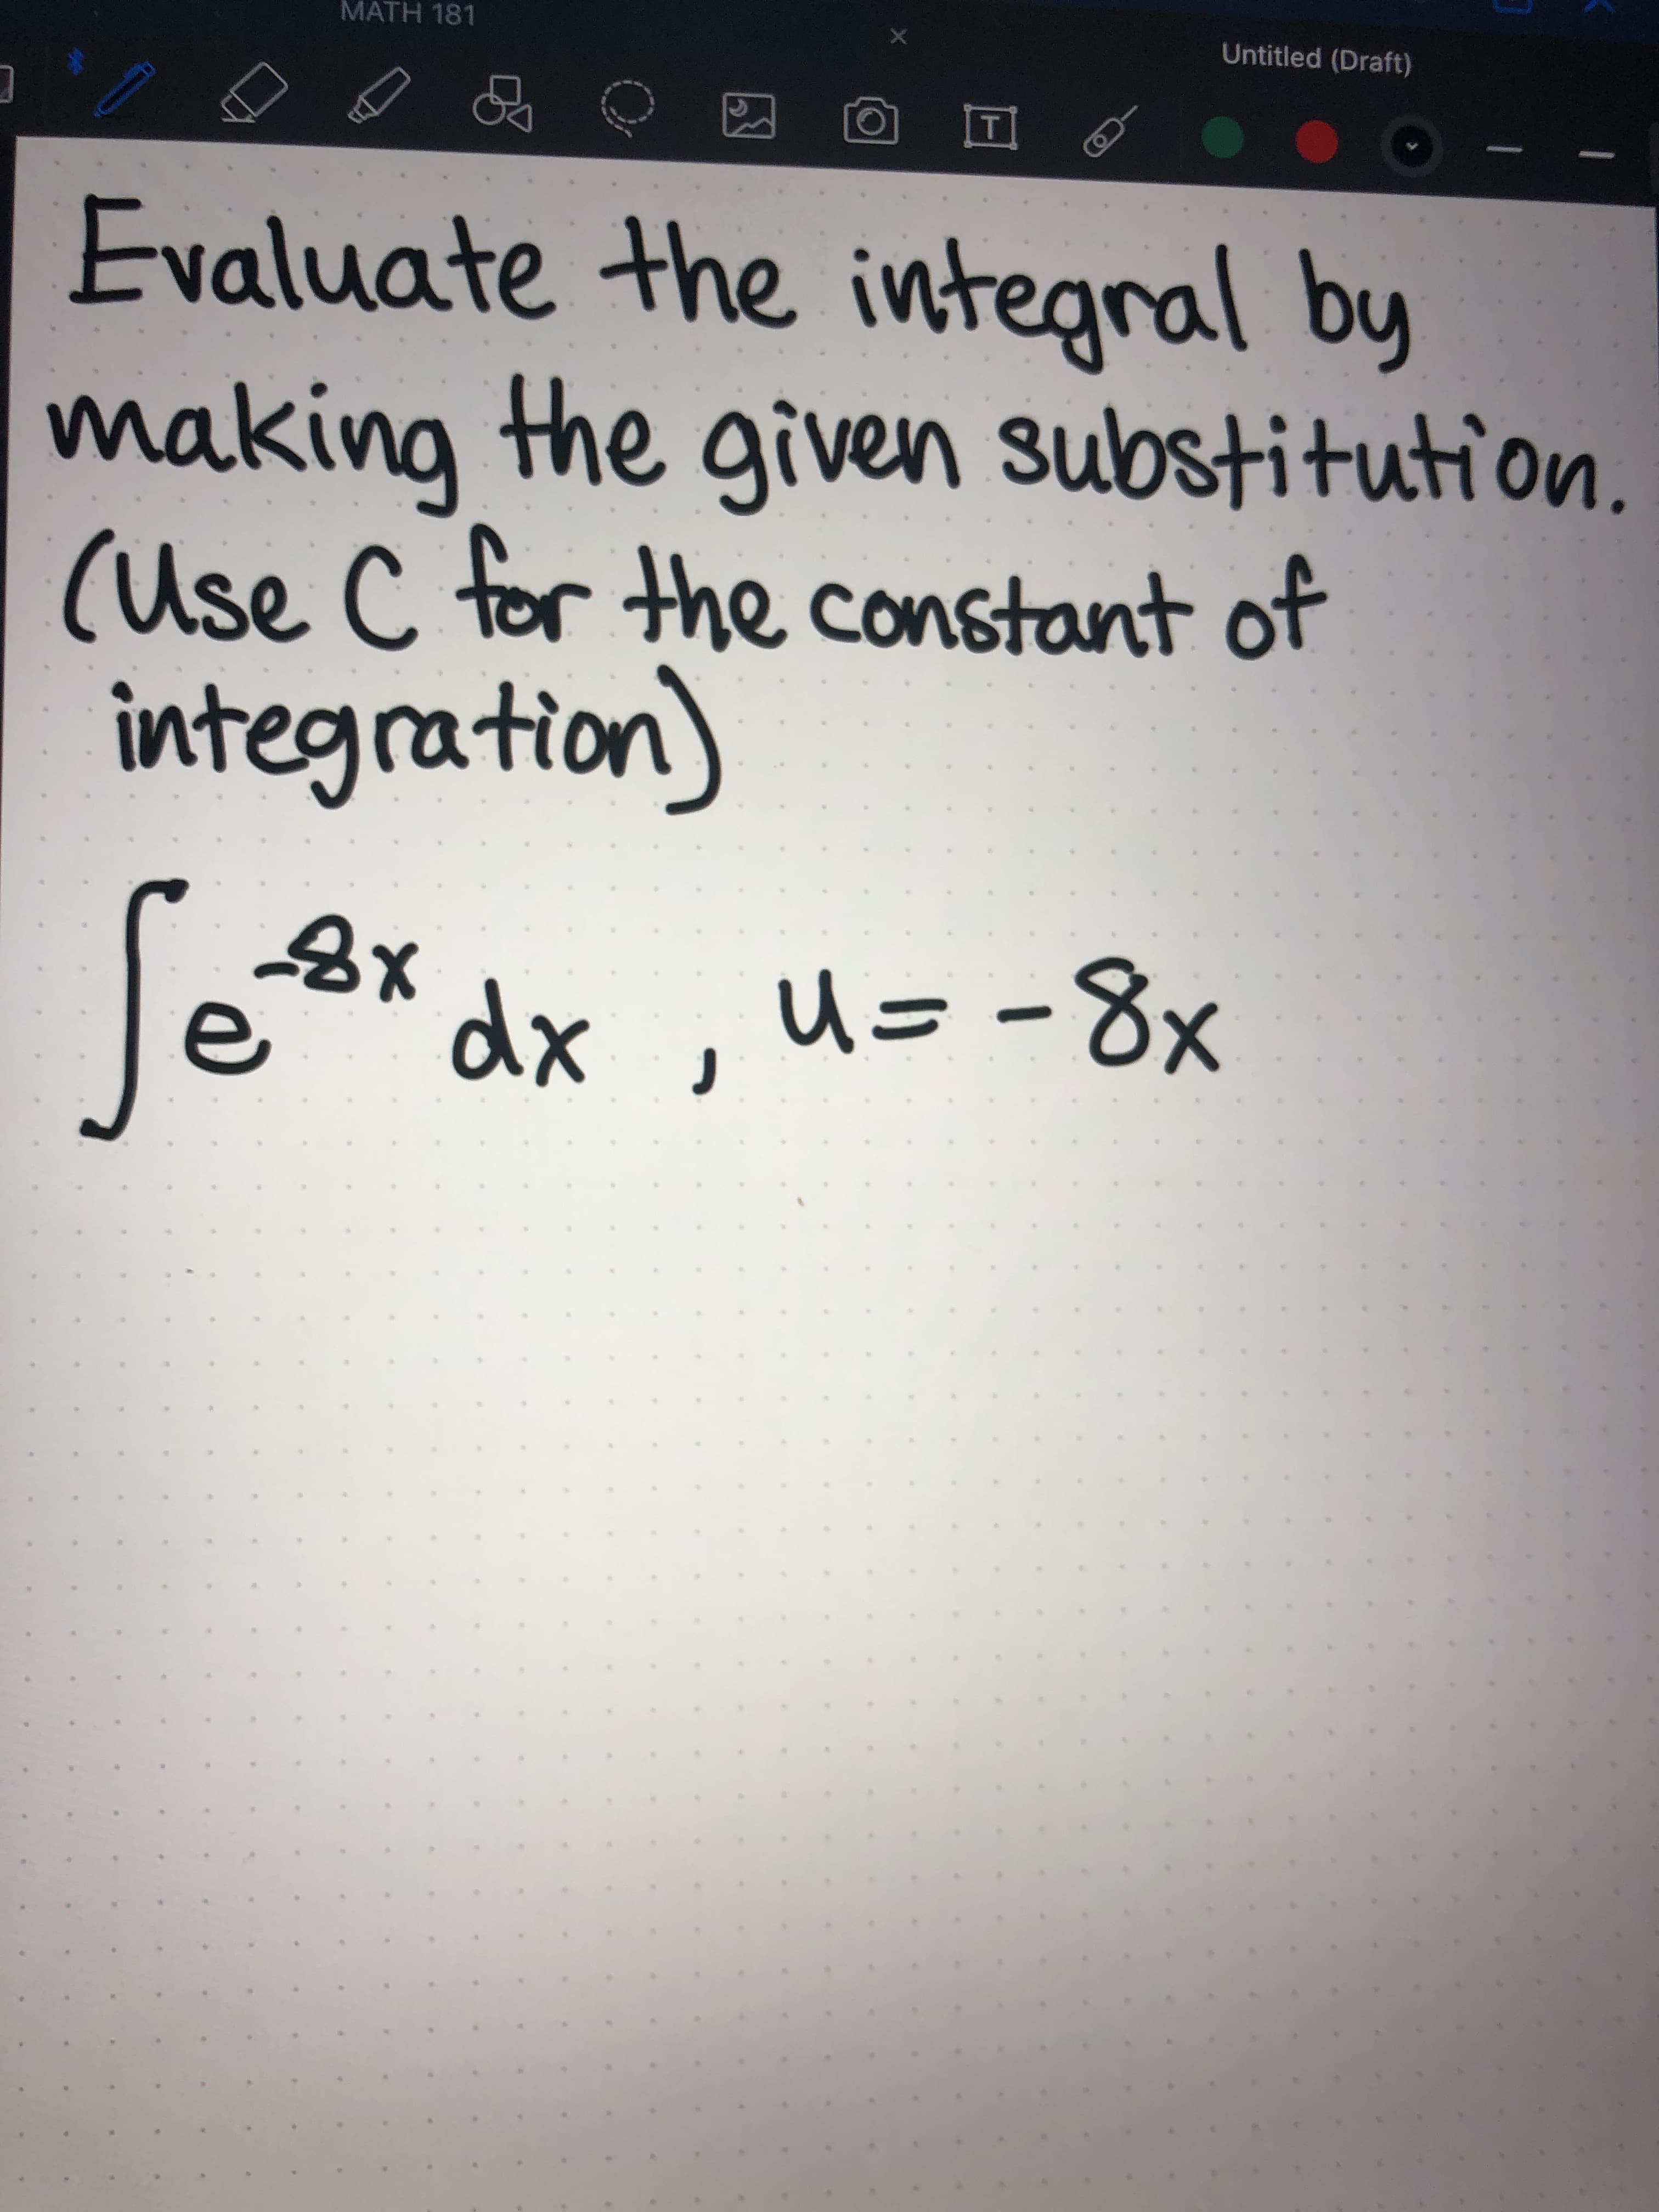 Evaluate the integral by
naking the given substitution.
Use C for the constant of
integration)
a* dx
U=-8x
